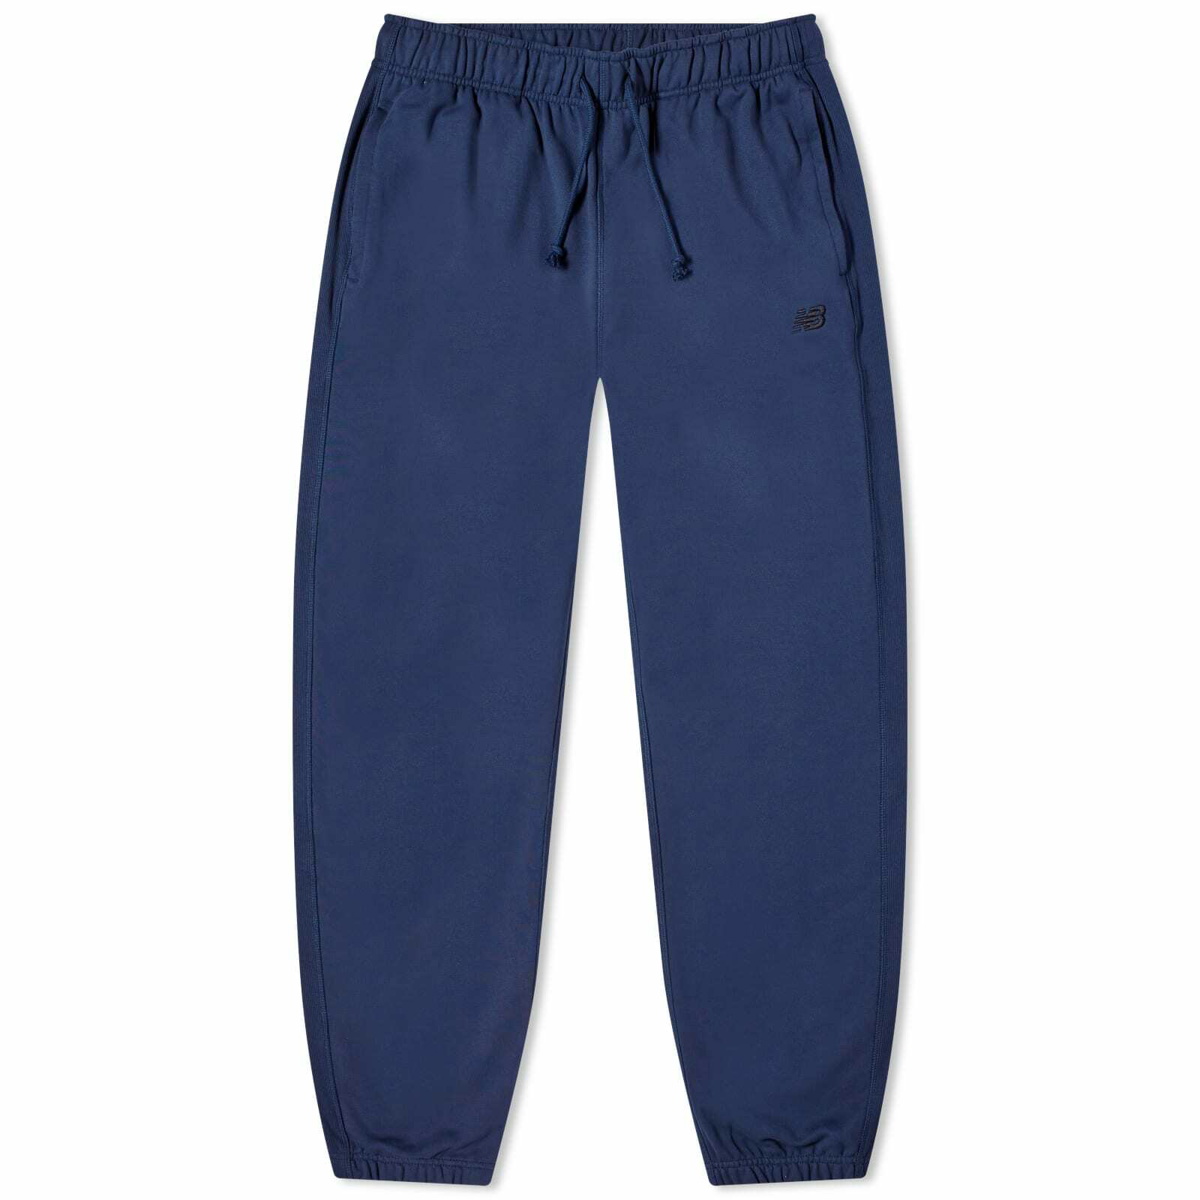 NS2167-2 250g French Terry Sweatpants in Navy – National Standards